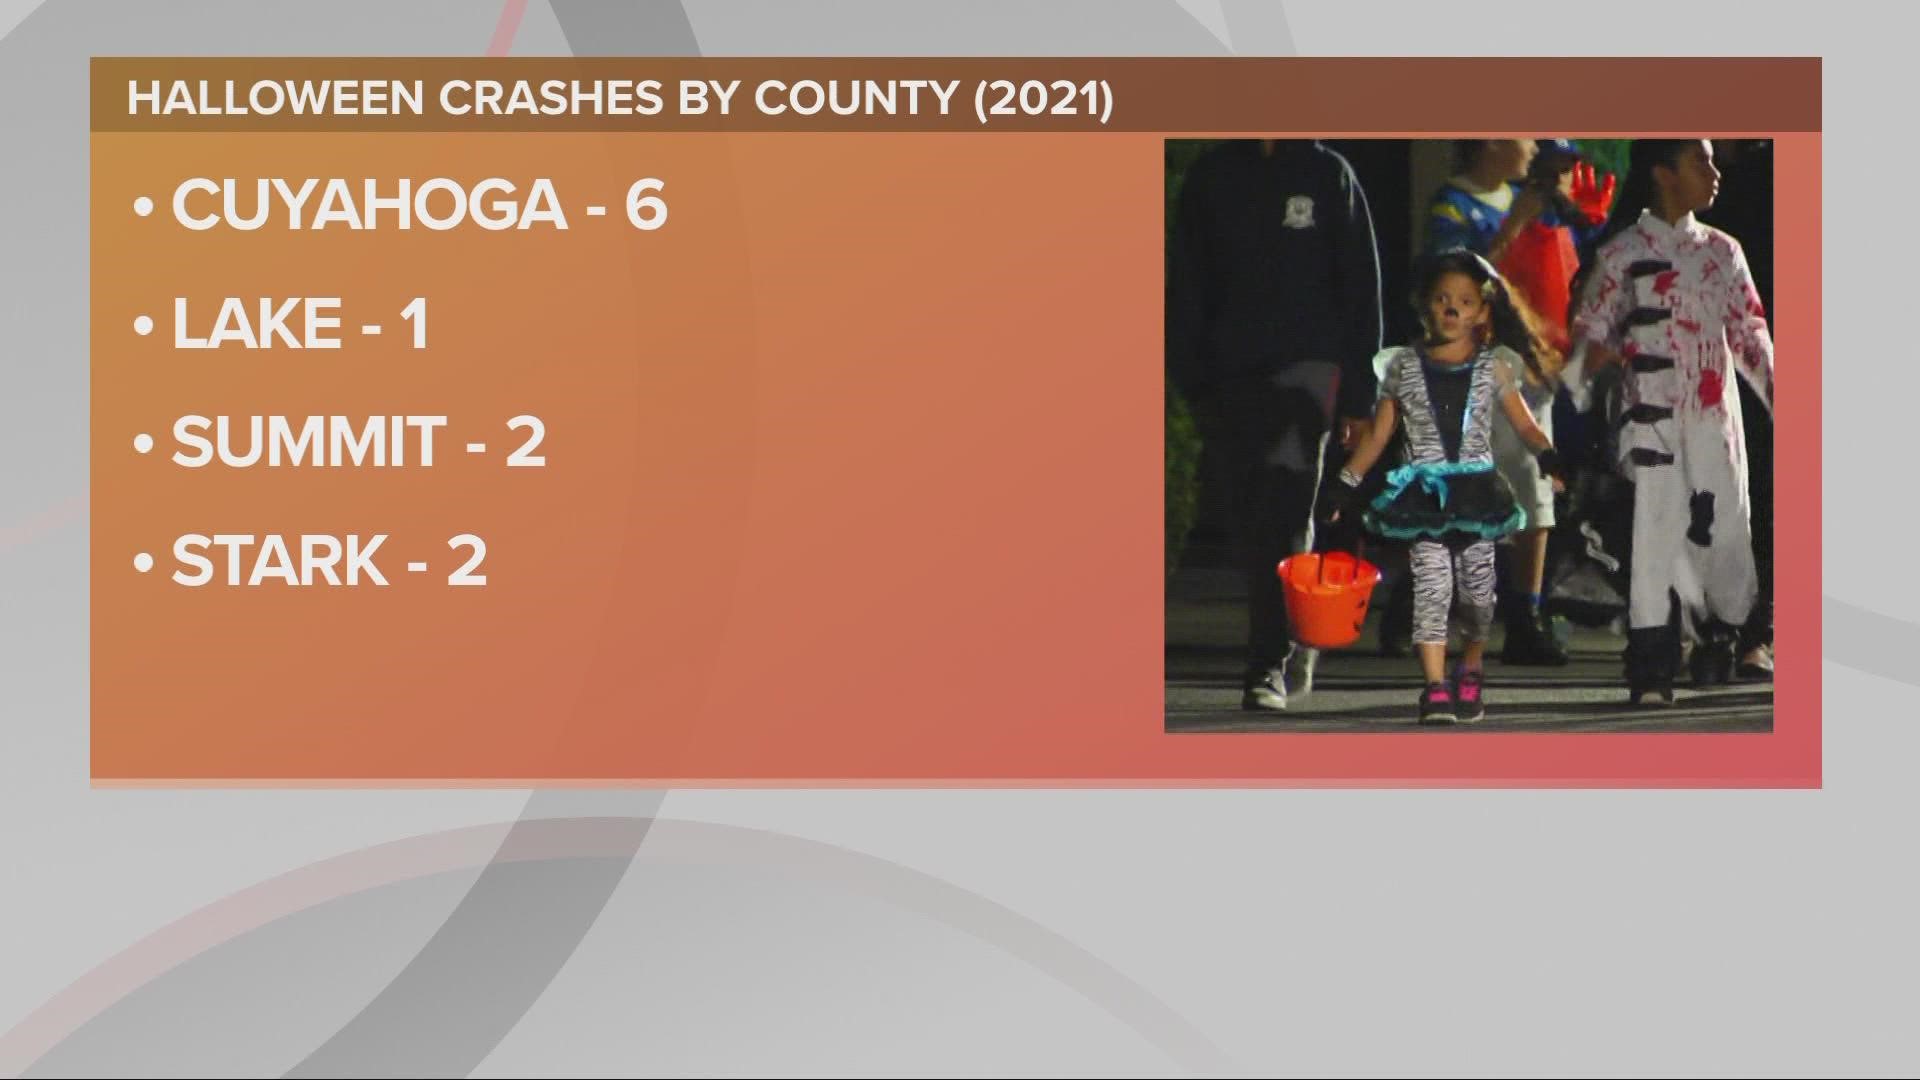 There are several tips both trick-or-treaters and drivers can adhere to this weekend.